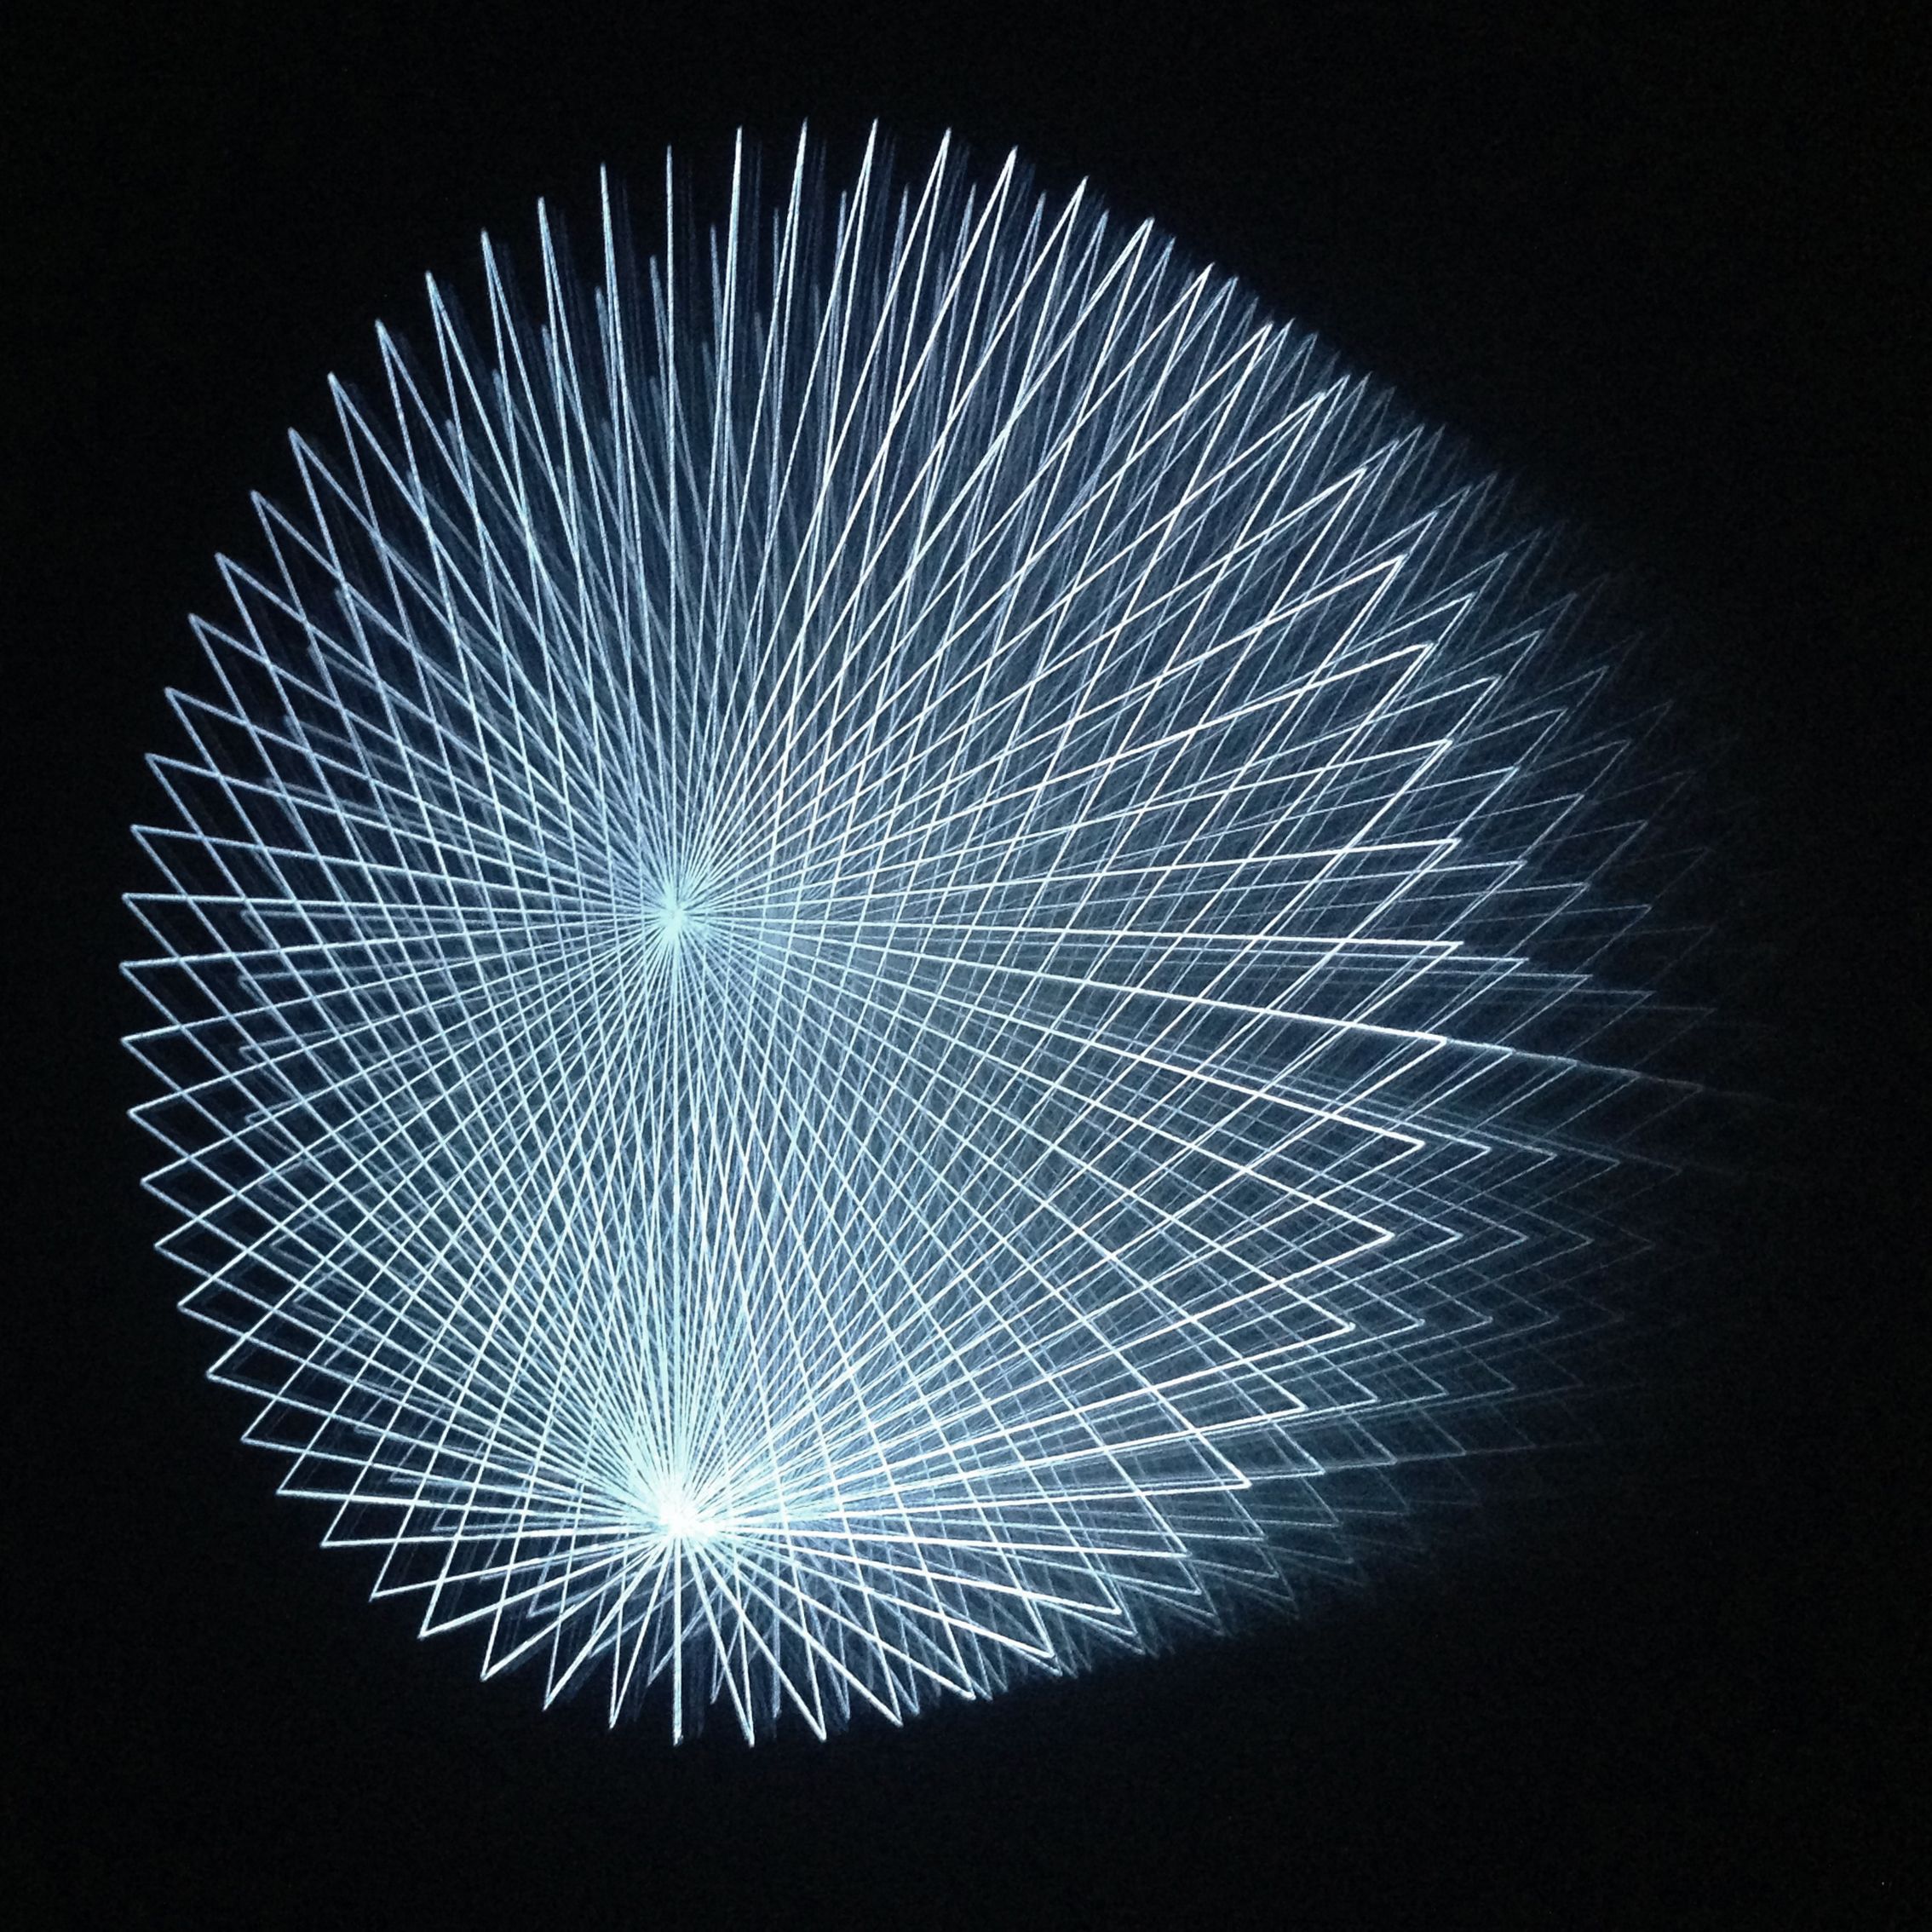 LED Object with infinity mirror effect by Simona Petrauskaite ...